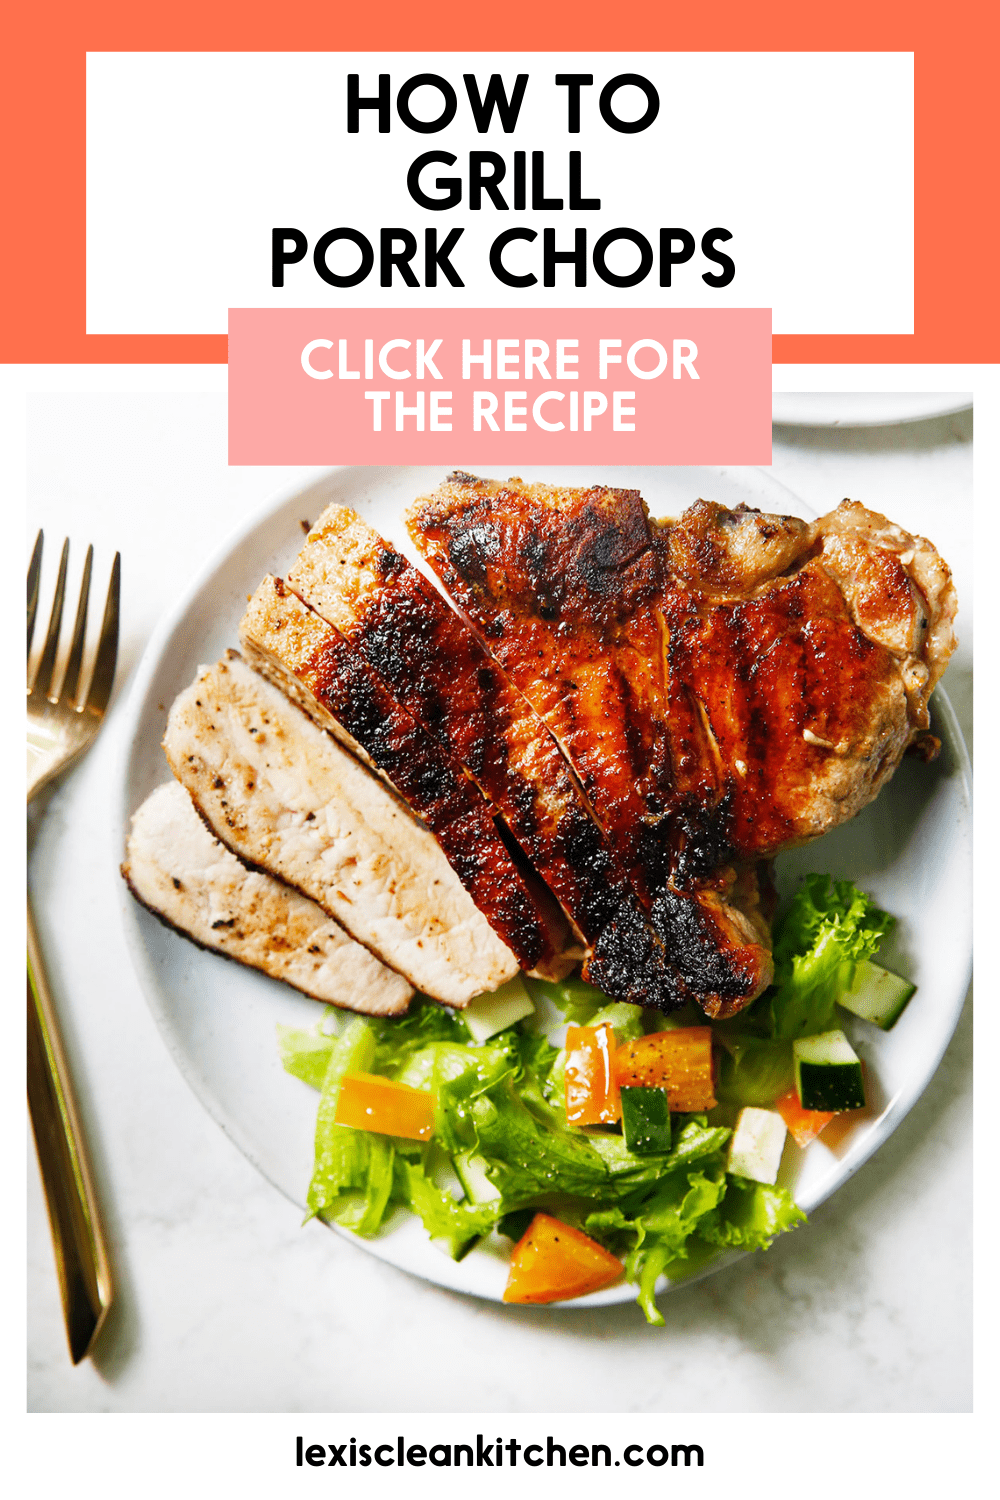 How to Grill Pork Chops - Lexi's Clean Kitchen